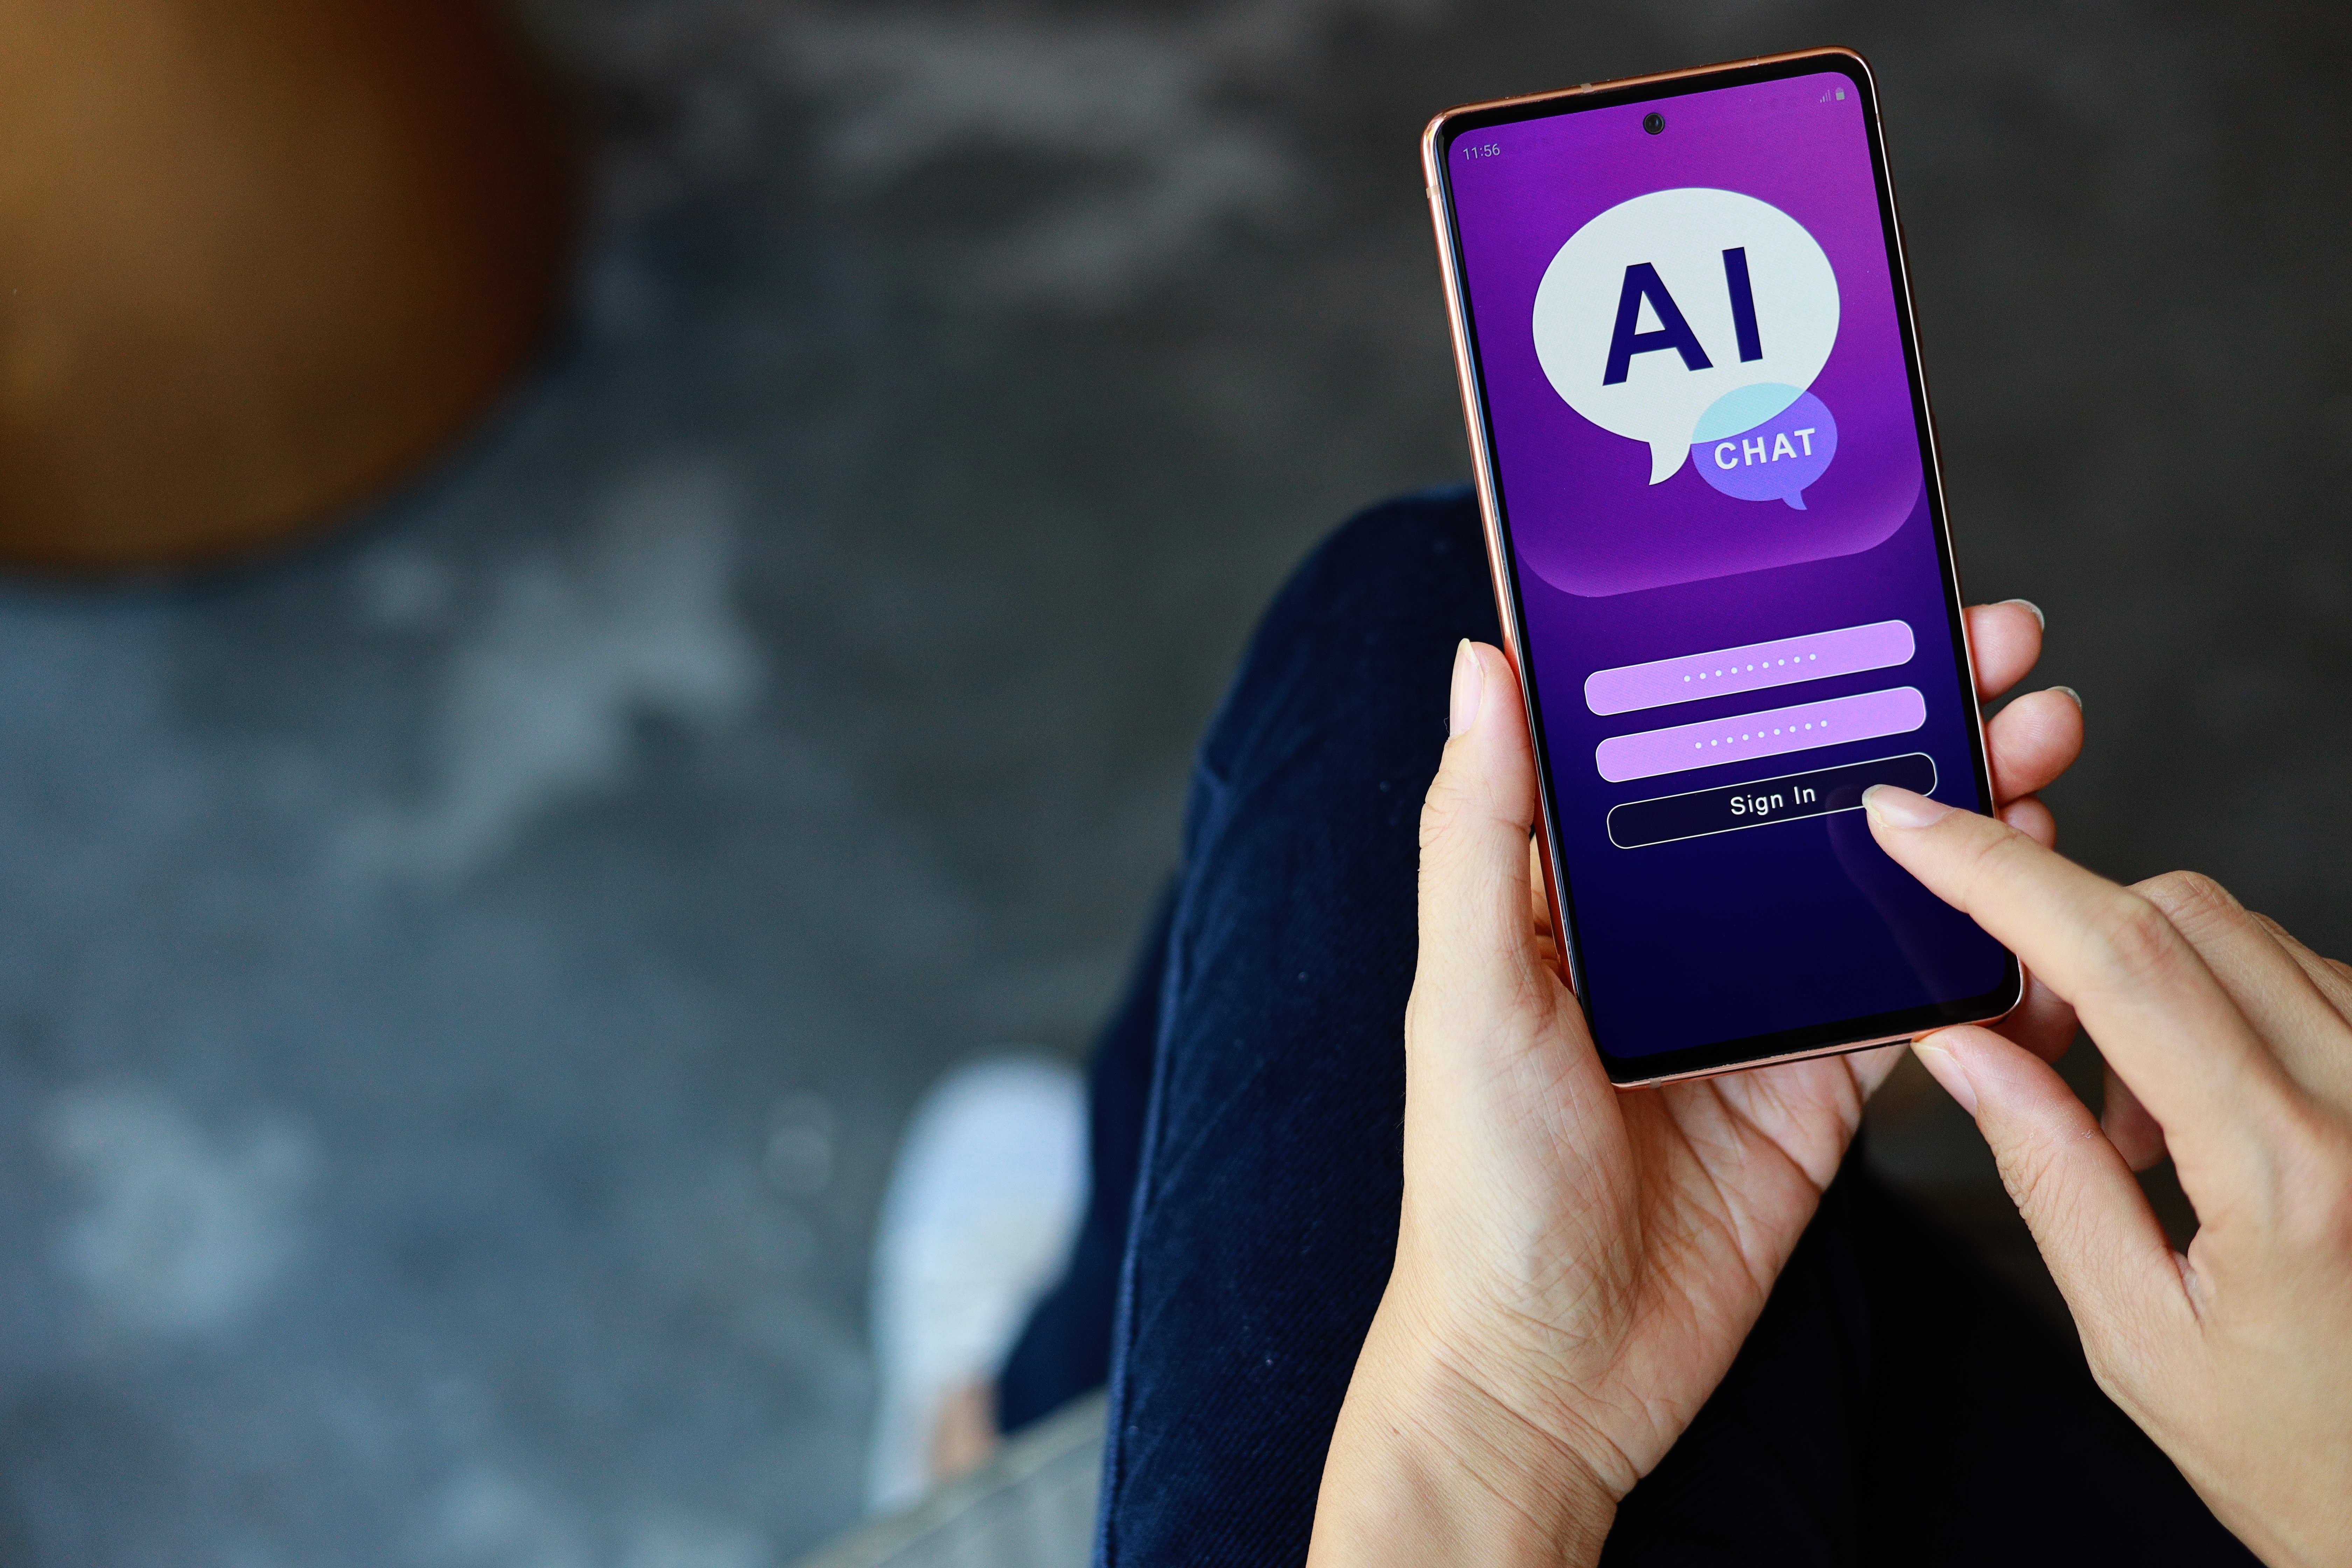 Apple's Highly Anticipated Artificial Intelligence (AI) Reveal Could Be Only 14 Days Away. Should You Buy the Stock Now?